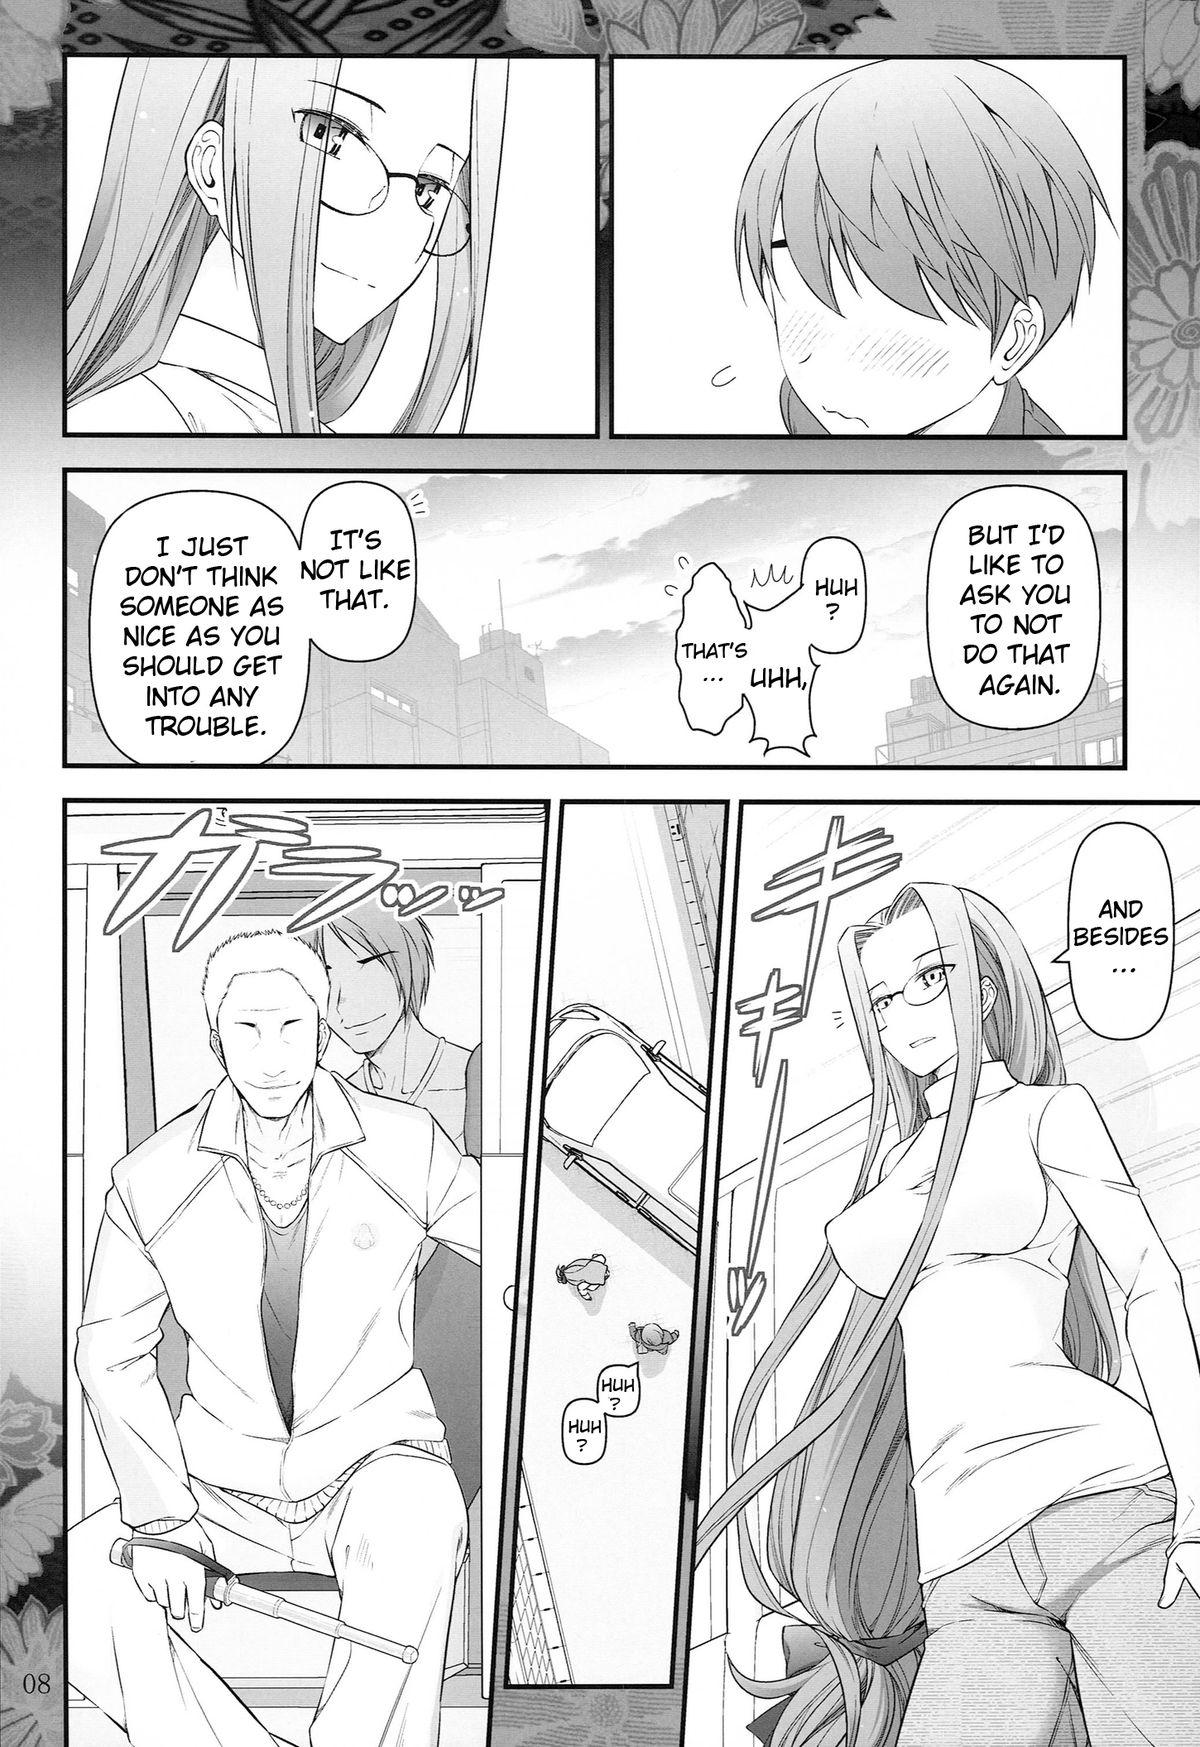 Hot Milf Fate/stay night Rider-san to Shounen no Nichijou | Fate/Stay Night Rider and Shounen's Daily Affection - Fate stay night Stockings - Page 9